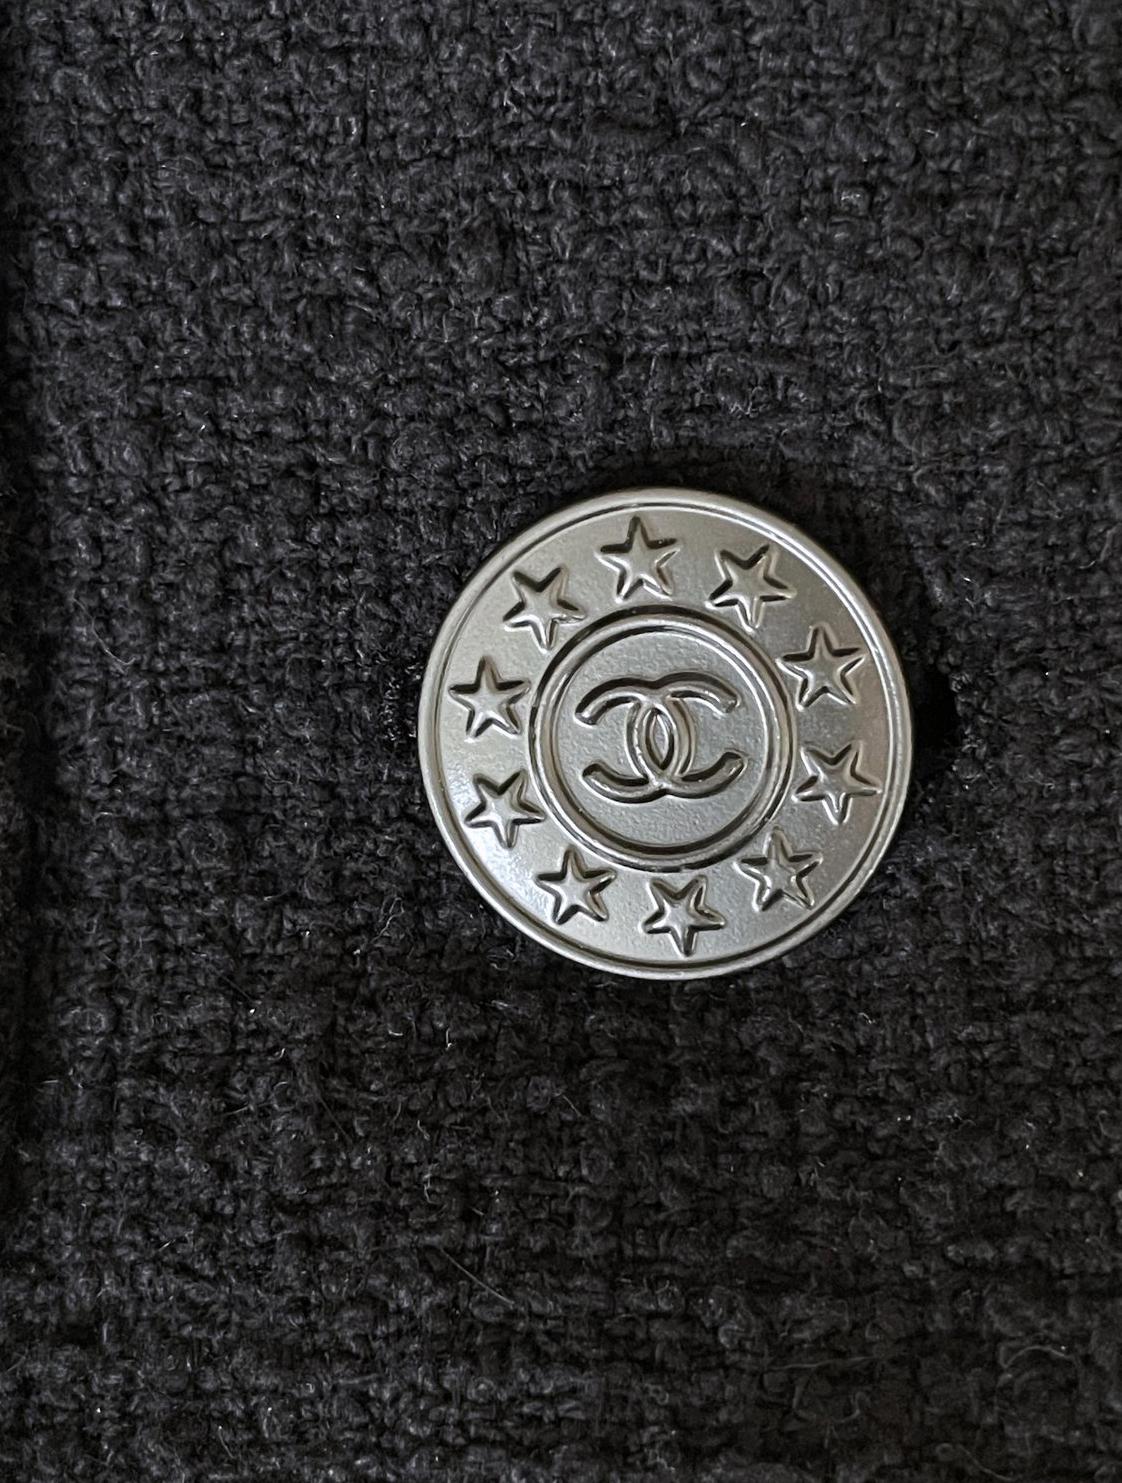 Timeless Chanel little black tweed jacket in interpretation of Paris / Singapore Cruise Collection.
Size mark 50 FR. Kept unworn, condition of s a new.
- CC logo starred buttons
- tonal silk lining with camellias
- chain link at interior hem